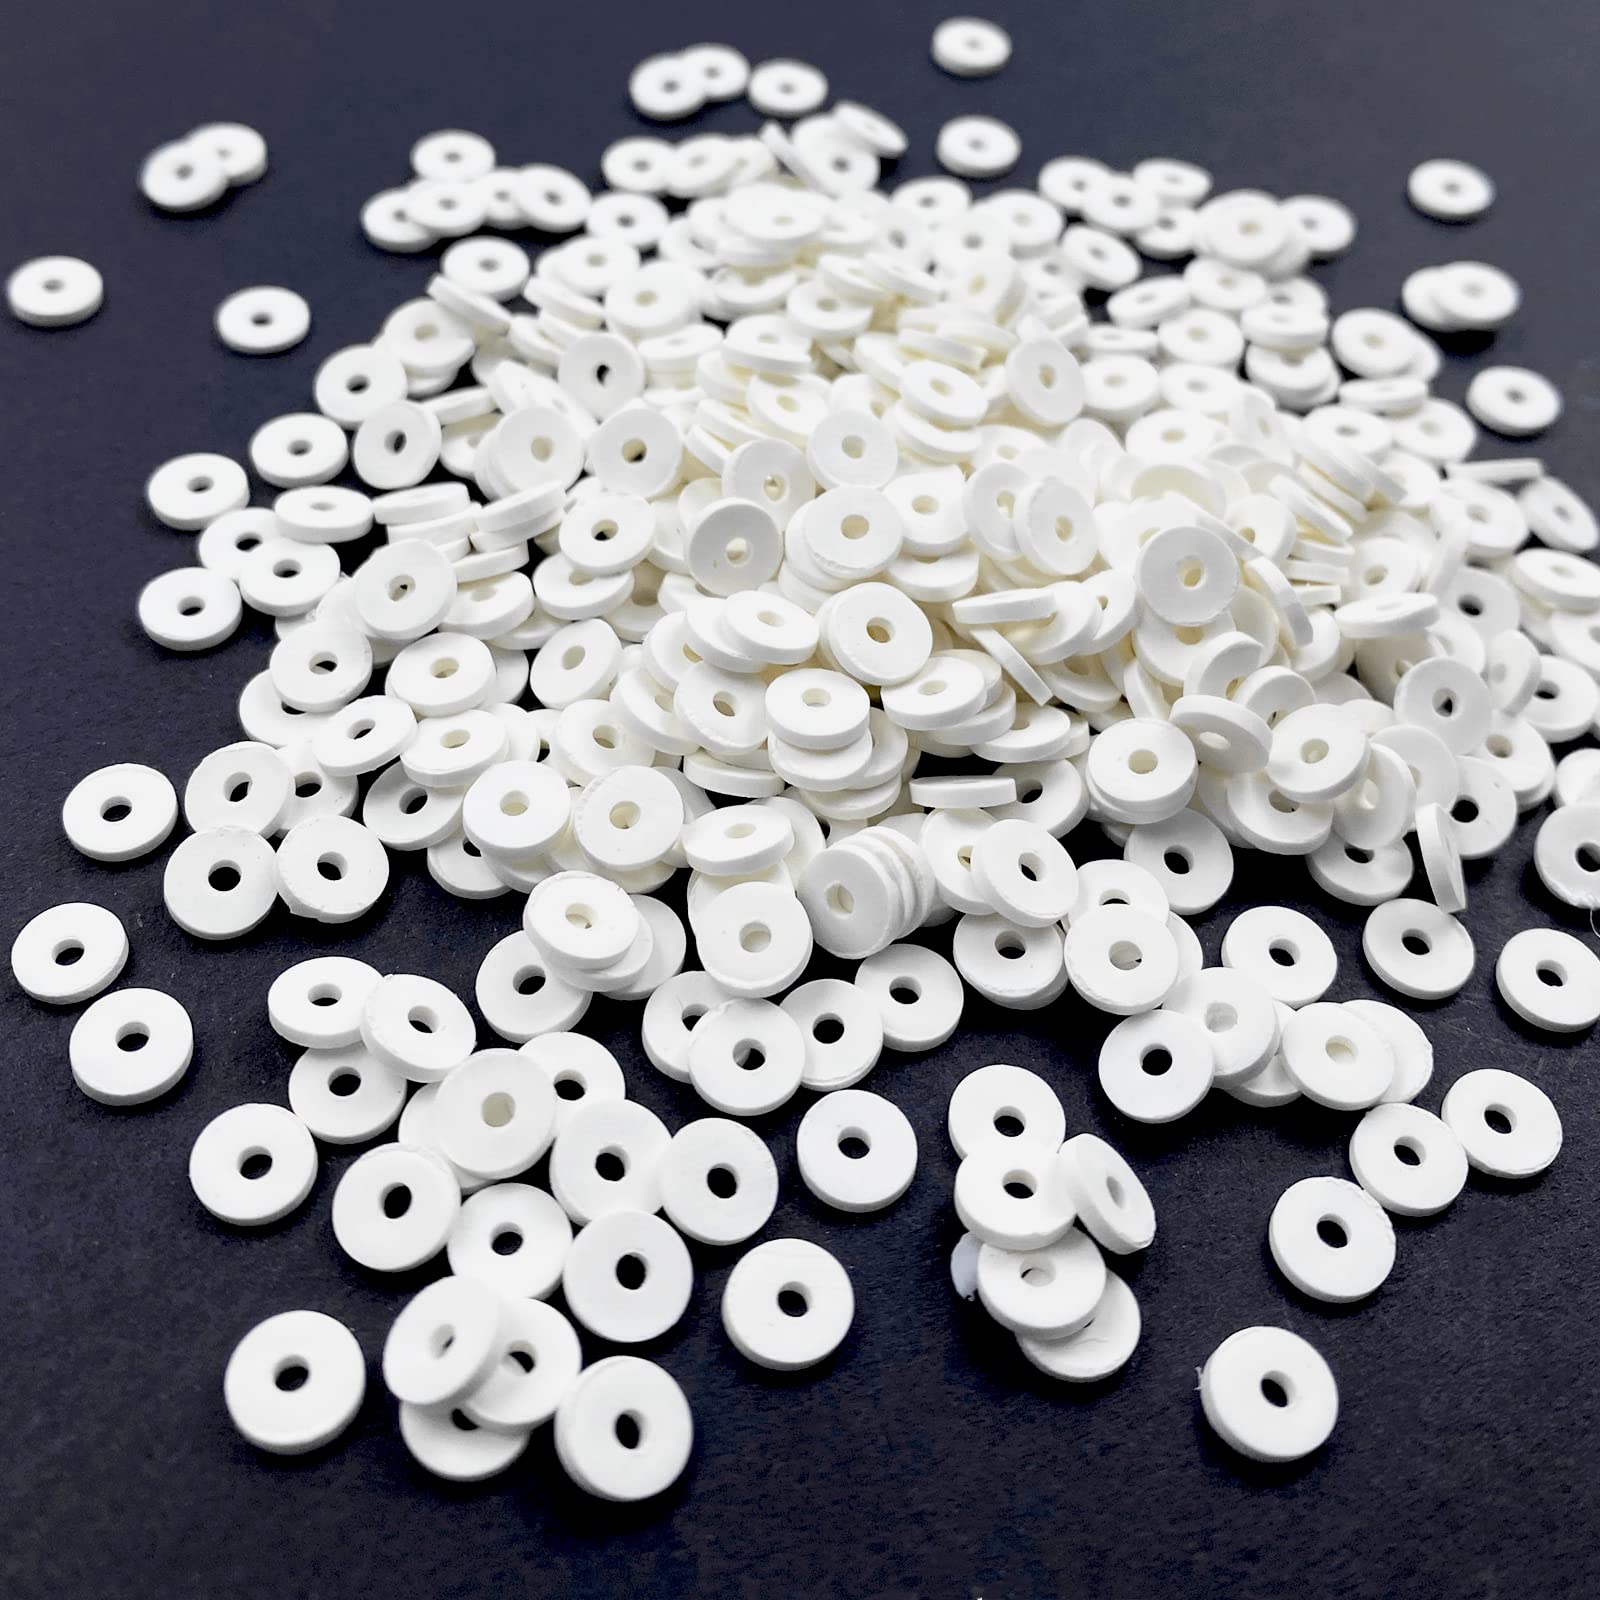 2000pcs Heishi Vinyl Beads Polymer Clay Beads Flat Round Spacer Beads for  Making Bracelet Necklace Earring